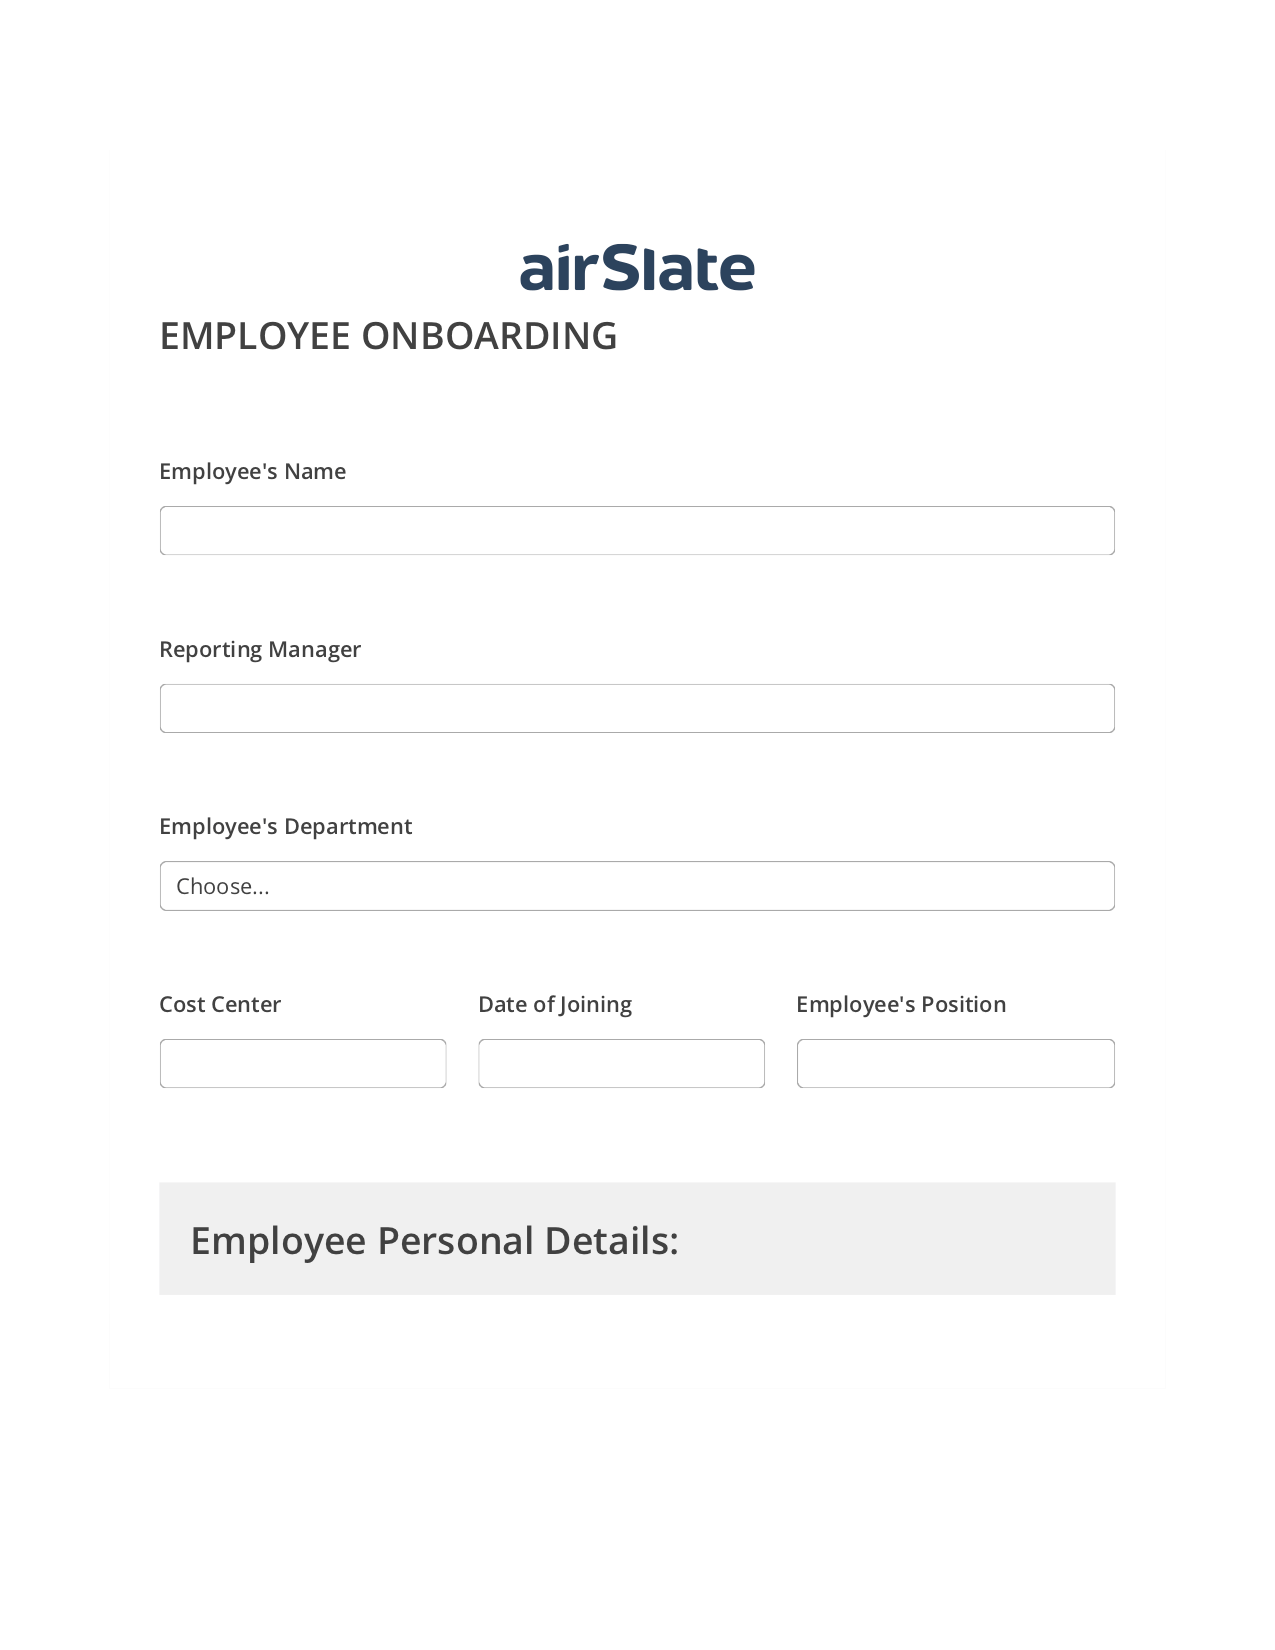 Employee Onboarding Workflow Pre-fill from MySQL Dropdown Options Bot, Jira Bot, Export to Excel 365 Bot